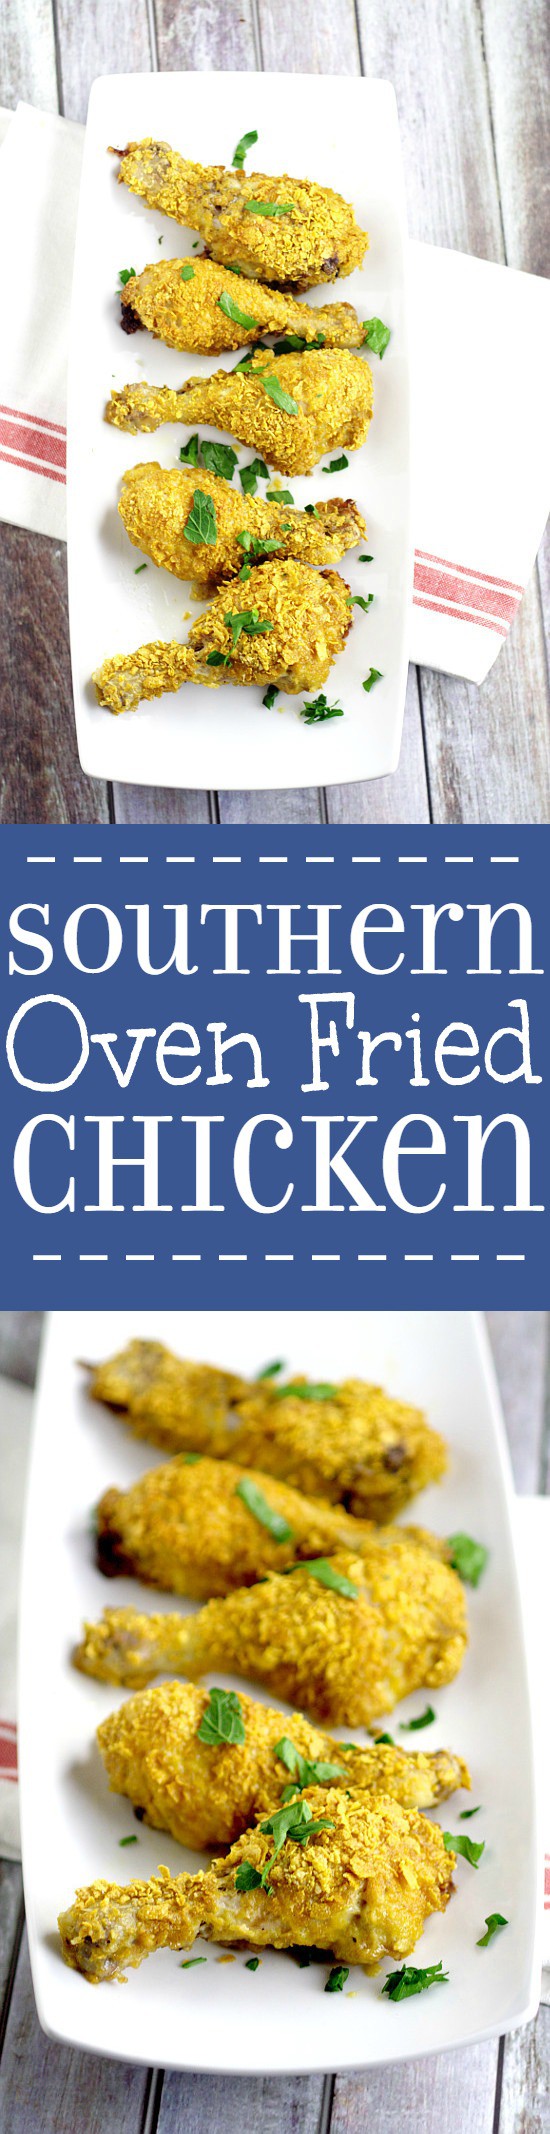 Southern Oven Fried Chicken for an easy family dinner idea. Quick prep and easy to make, this authentic Southern Oven-Fried Chicken is the perfect family dinner. Crunchy, juicy flavorful breaded chicken baked in the oven. This looks amazing!